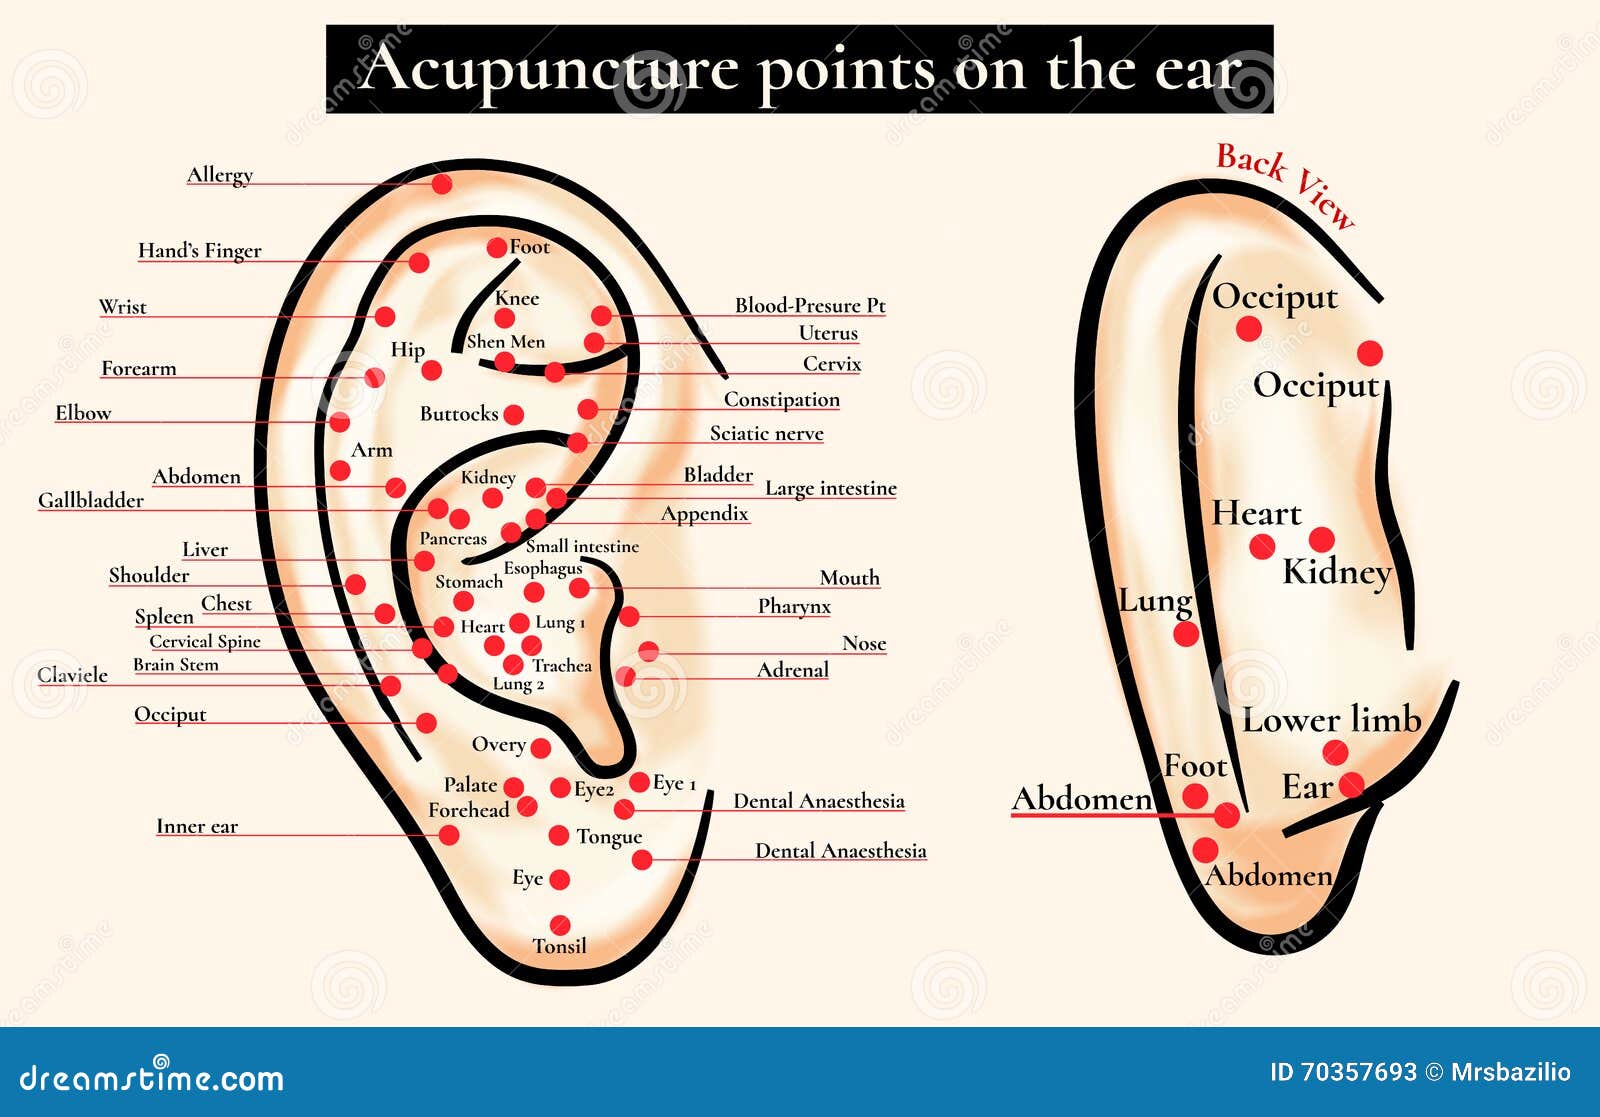 reflex zones on the ear. acupuncture points on the ear. map of a